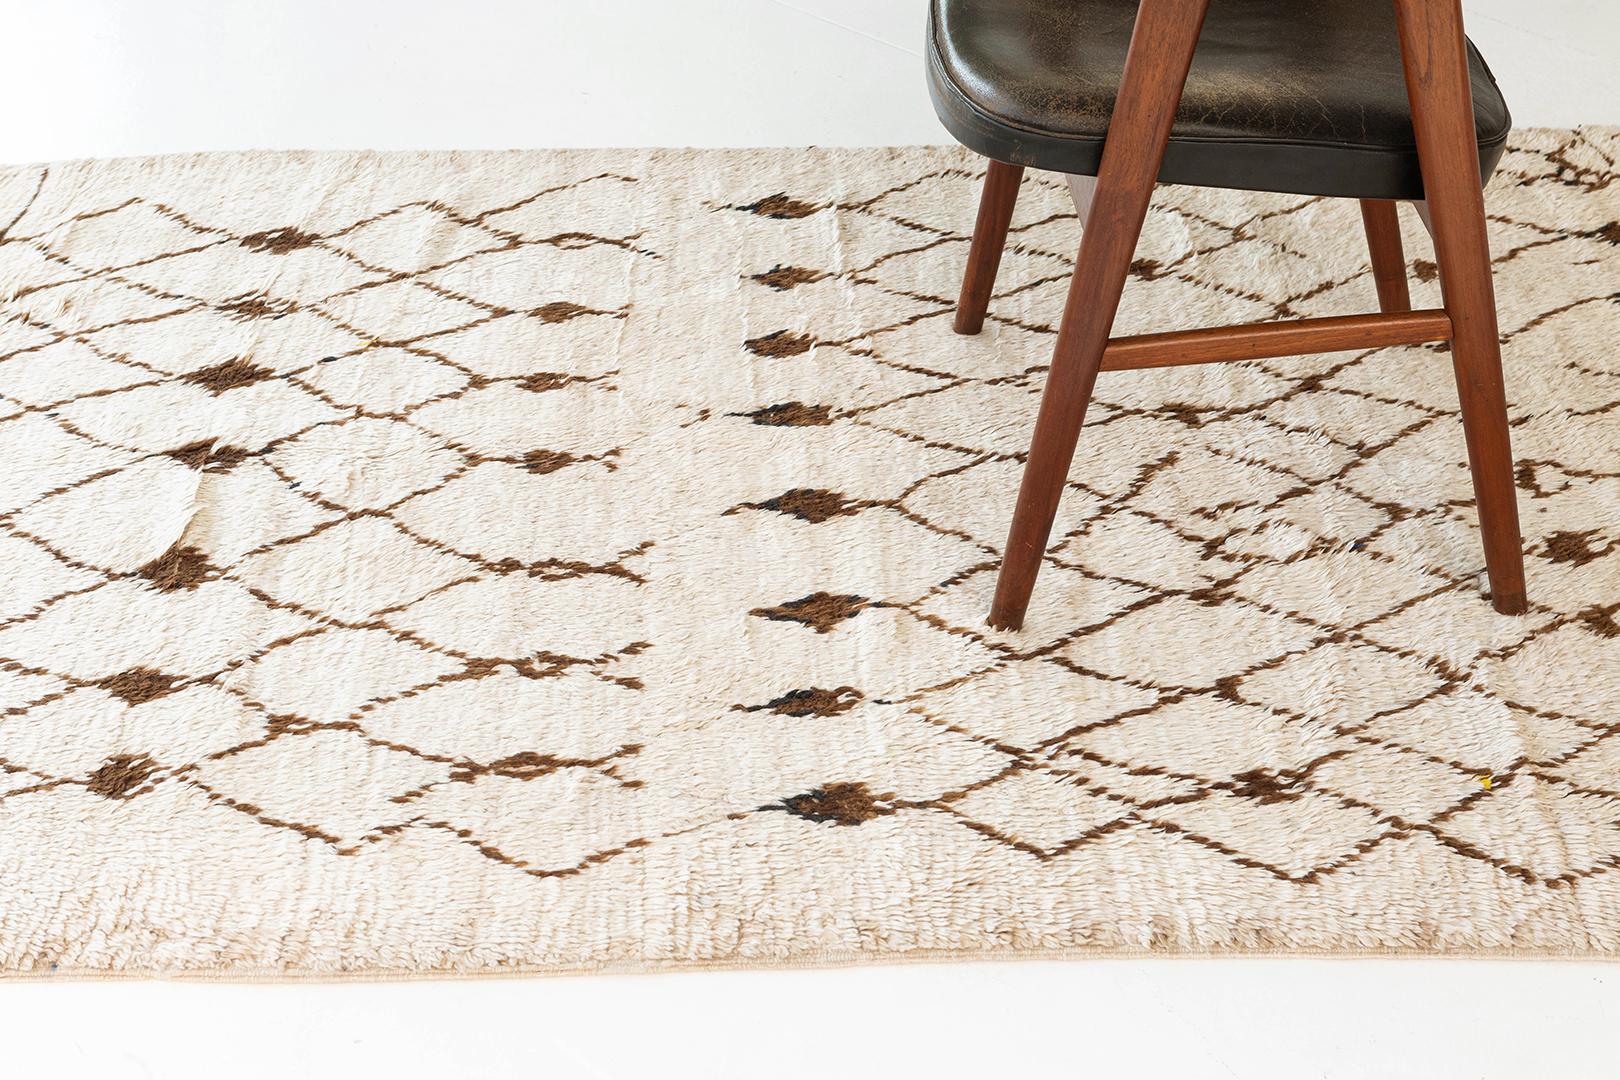 Emanating grace and charm, this inviting Vintage Moroccan Middle Atlas Tribe rug provides an elegant design aesthetic and subtle colour scheme. It features a pattern of brown crisscross lines forming series of lozenge trellis running in the length